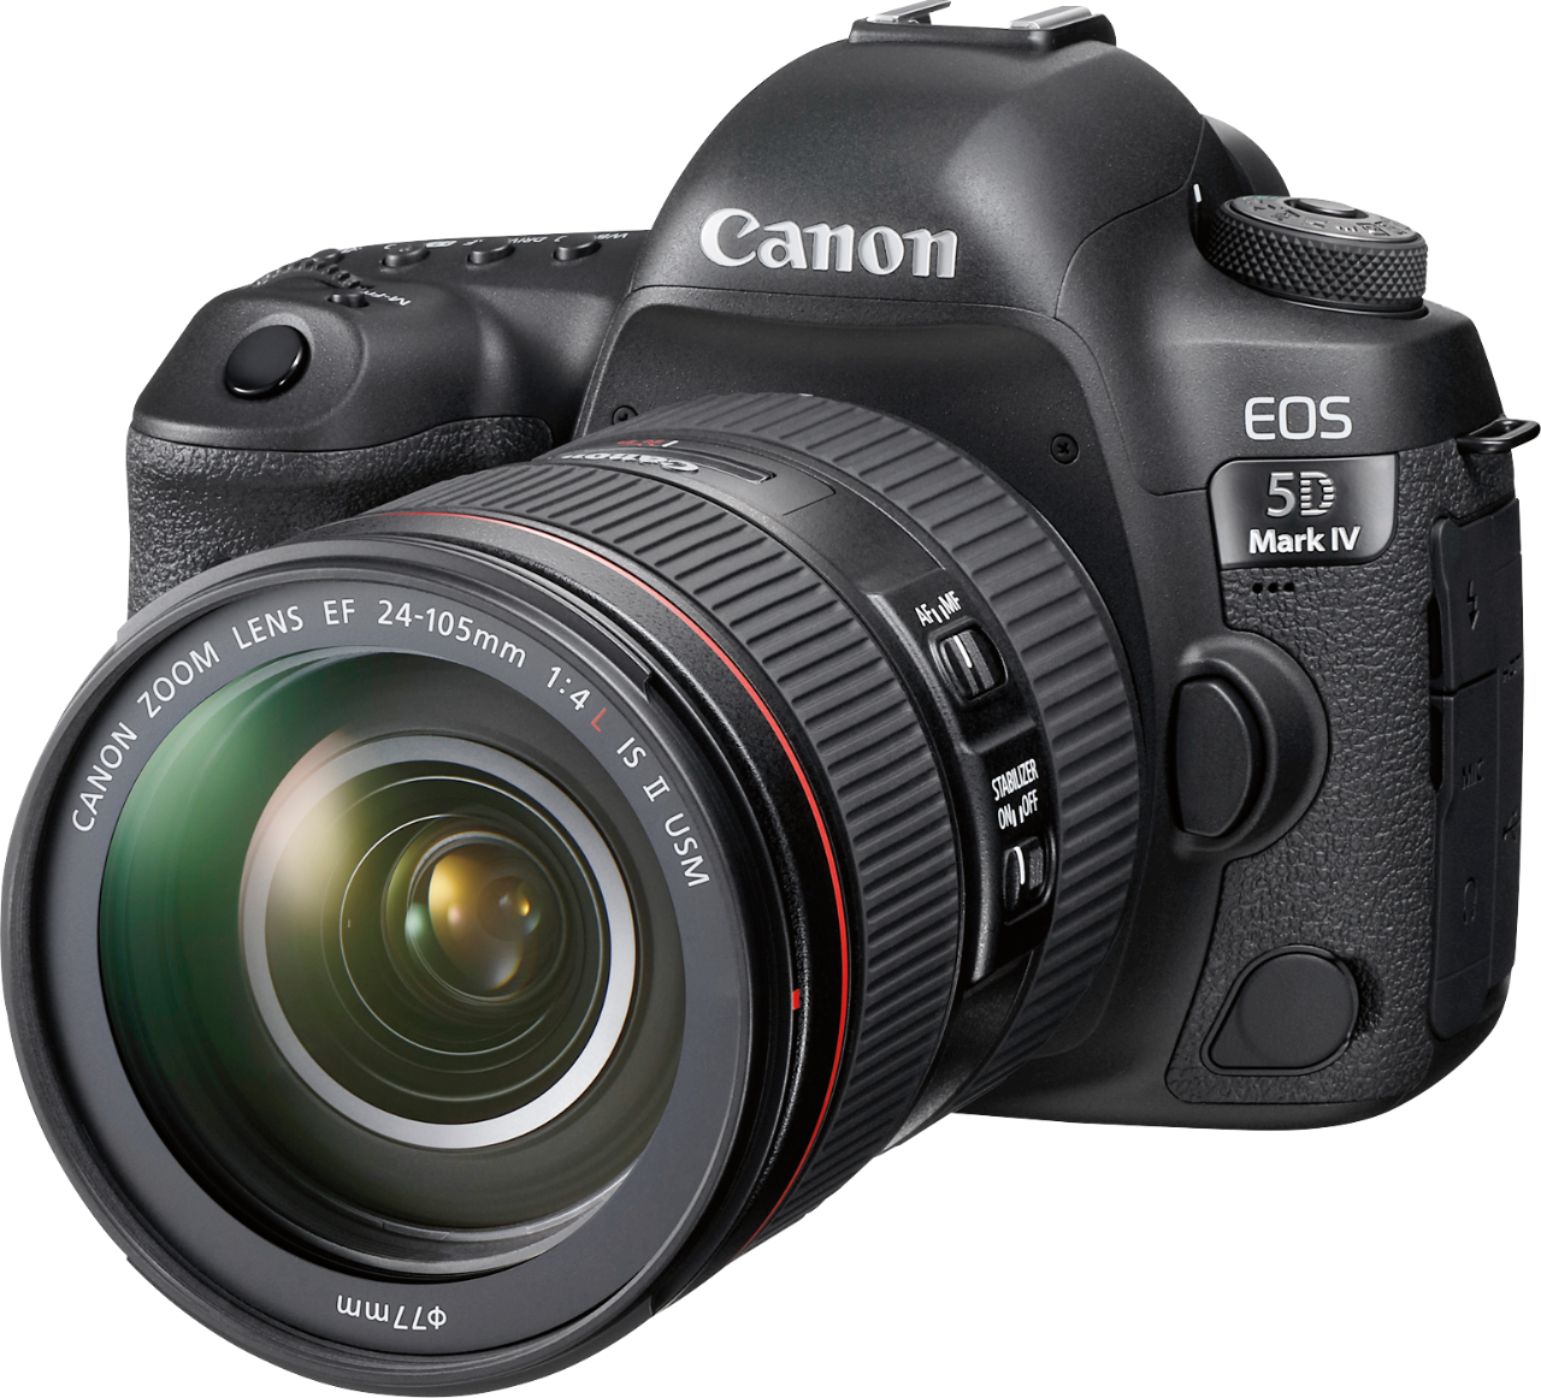 Canon EOS 5D Mark IV DSLR Camera with 24-105mm f/4L IS II USM Lens 